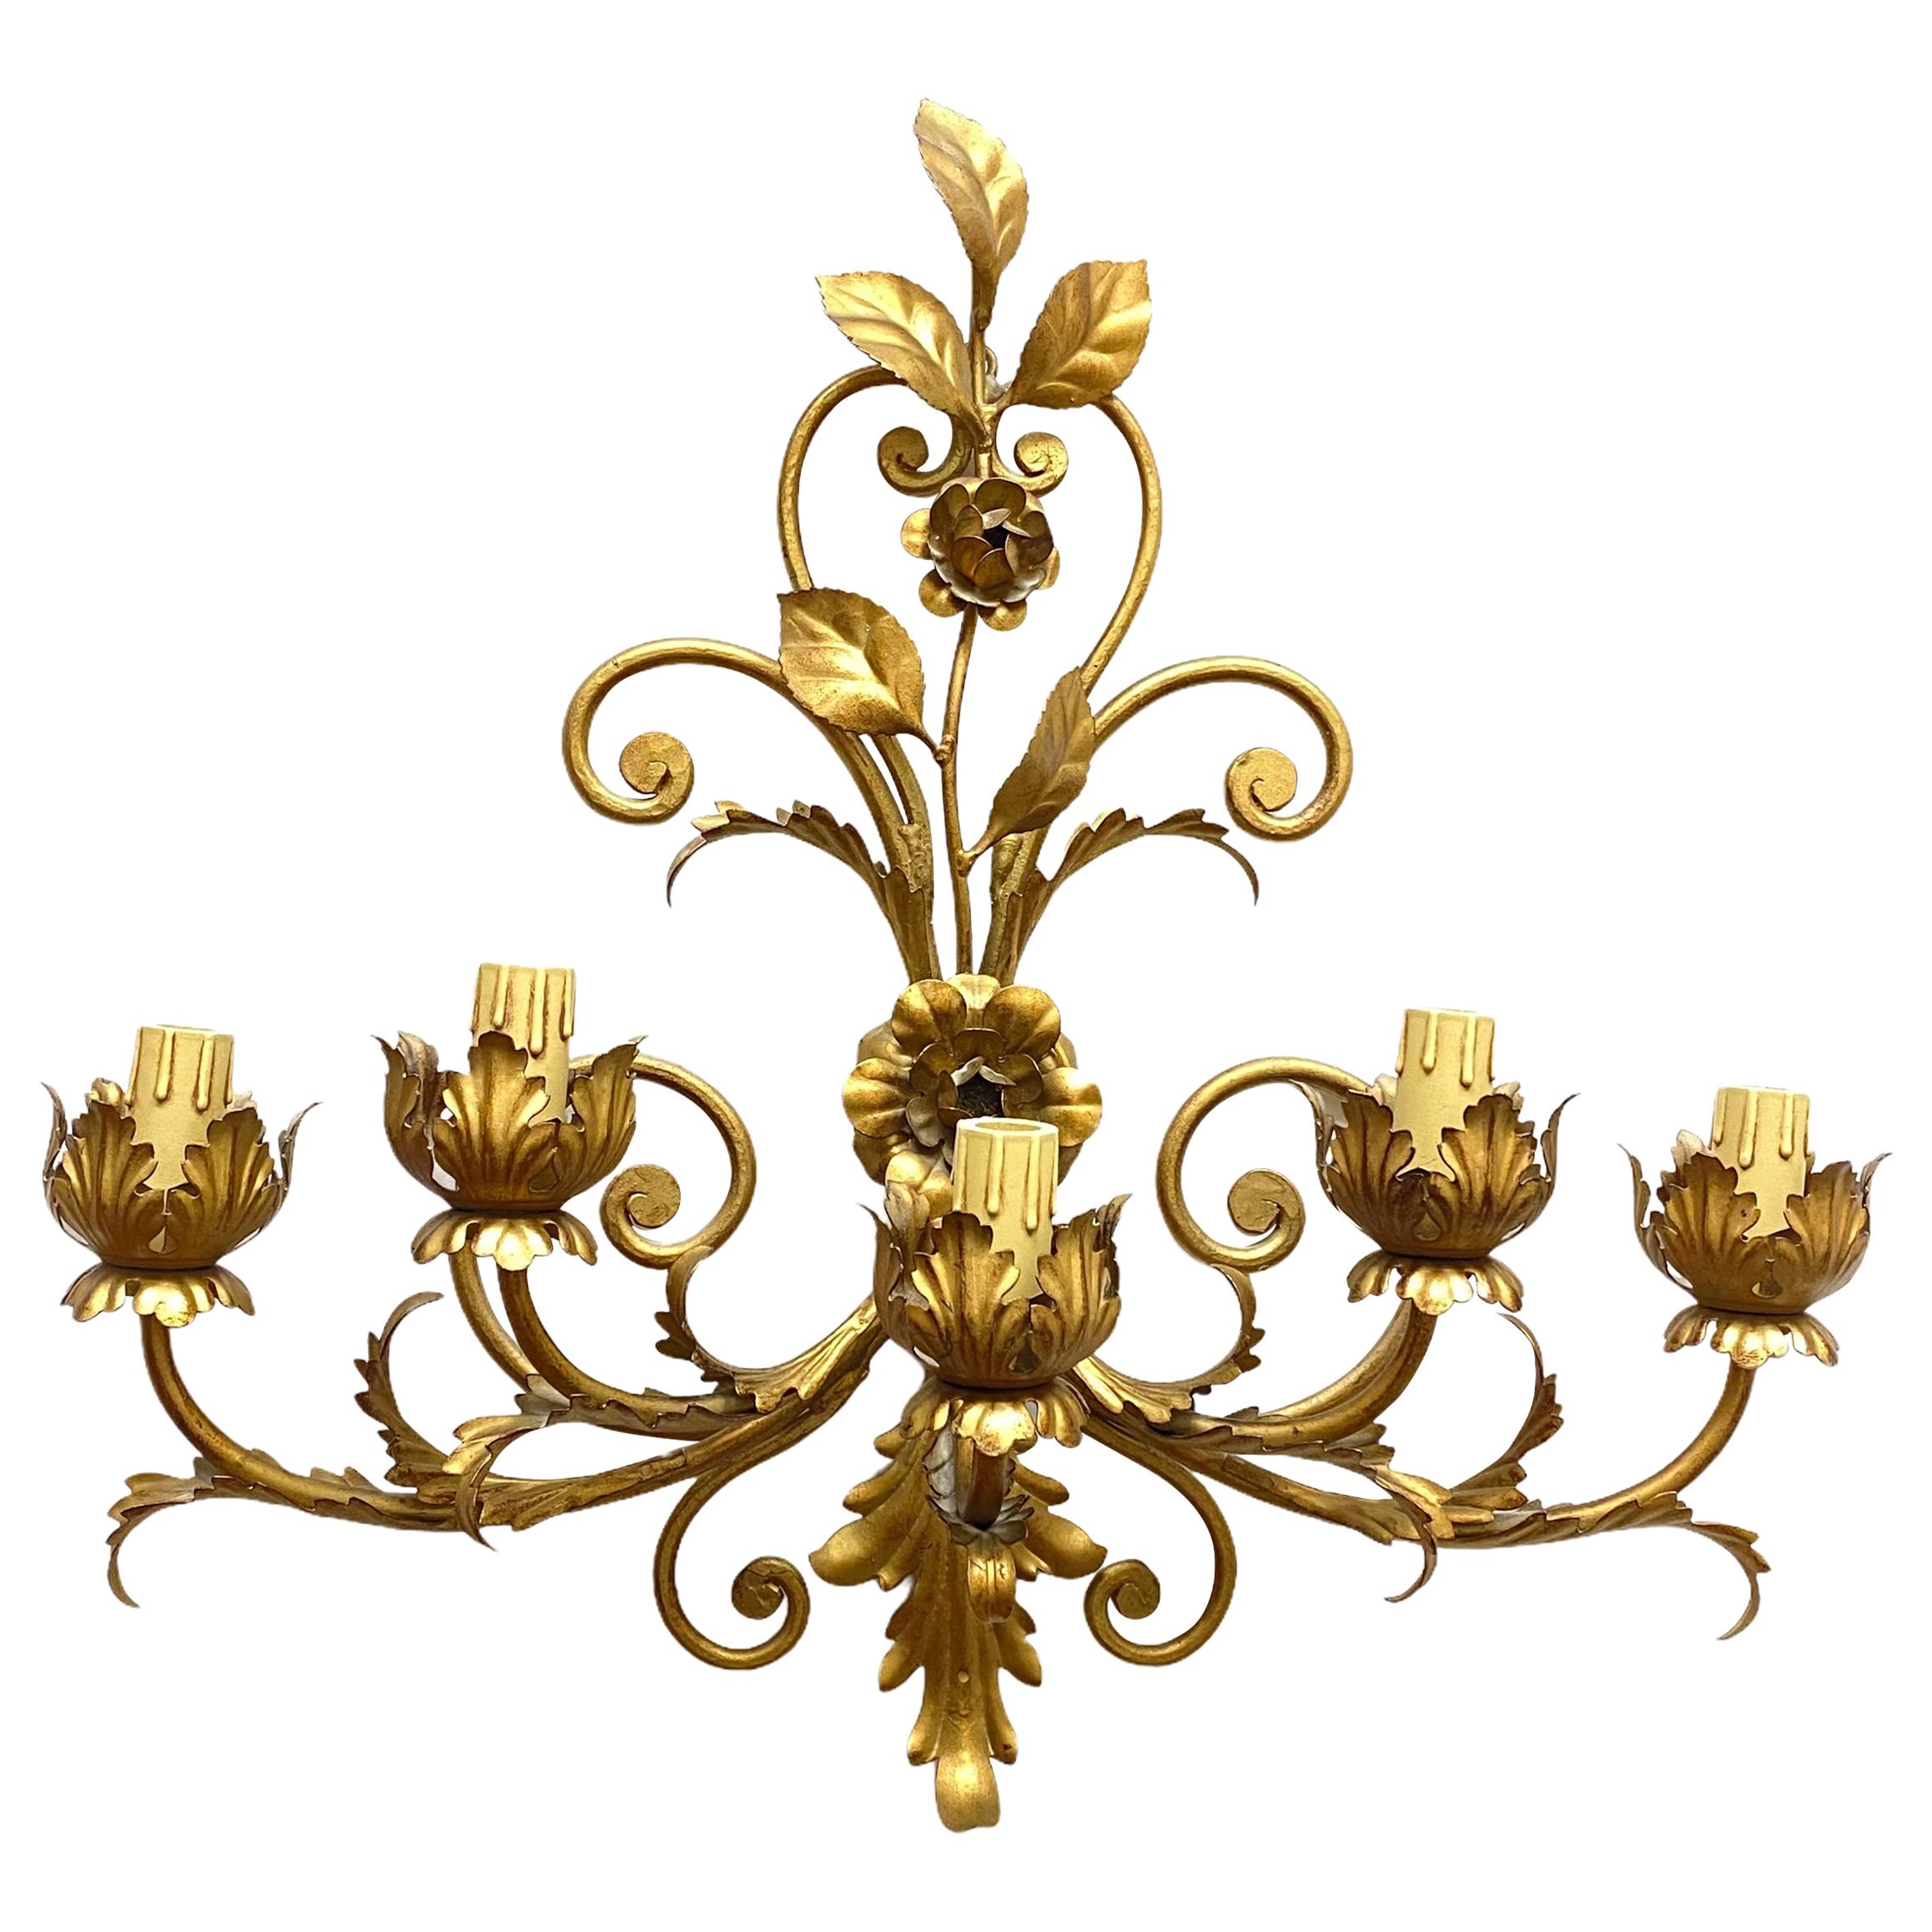 Stunning Five-Light Gilt Metal Leafs Tole Hollywood Regency Sconce, Italy, 1960s